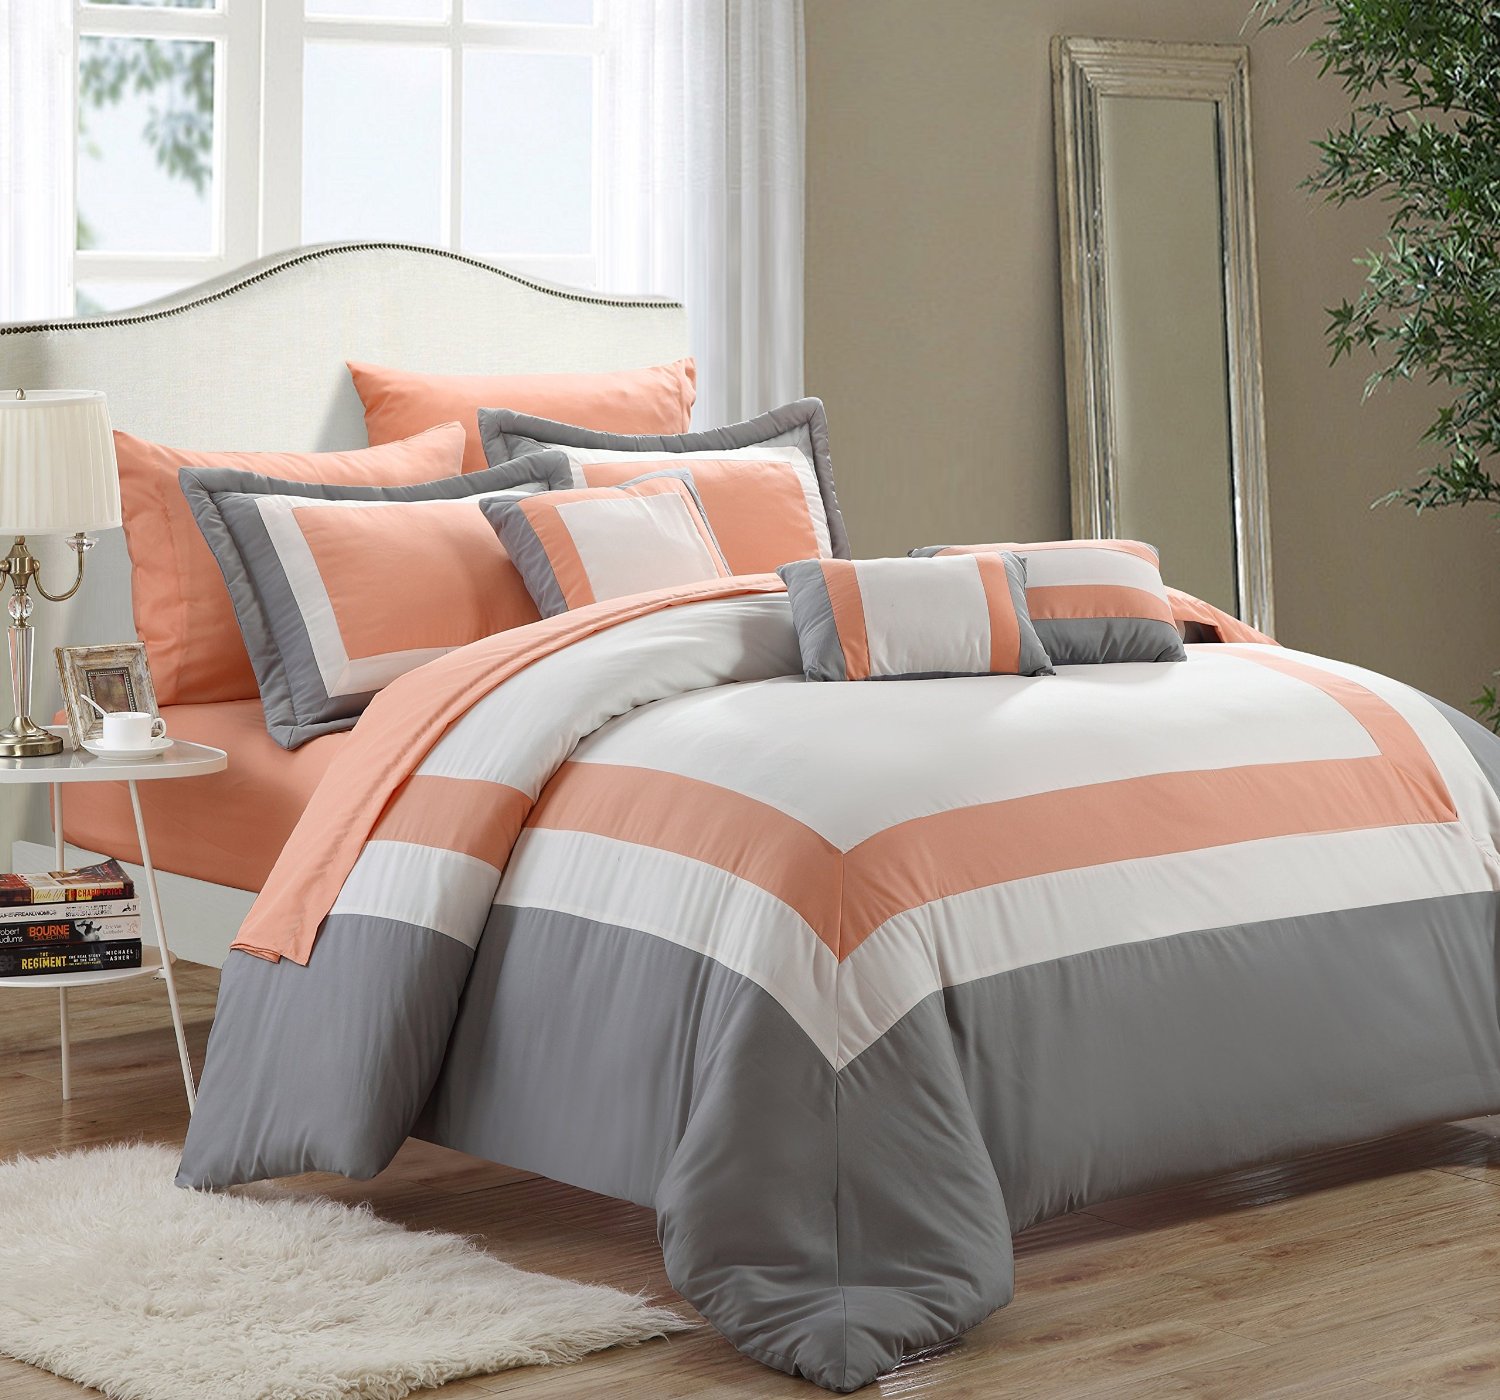  Peach  Colored Comforters Bedding Sets